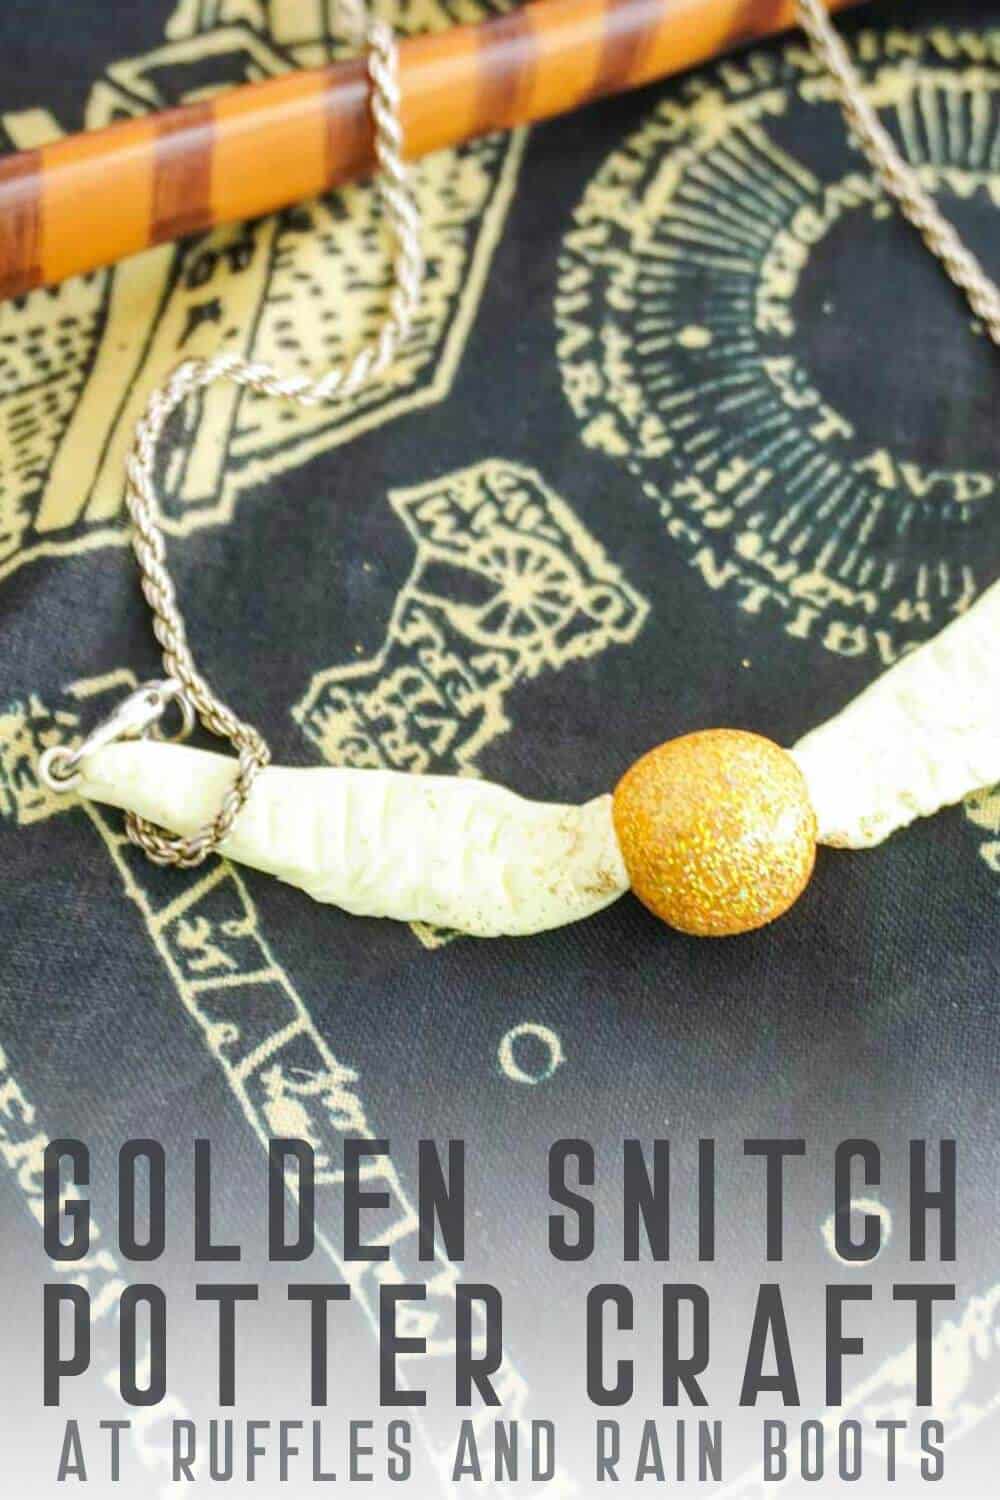 Harry Potter Golden Snitch Craft for Kids with text which reads golden snitch potter craft